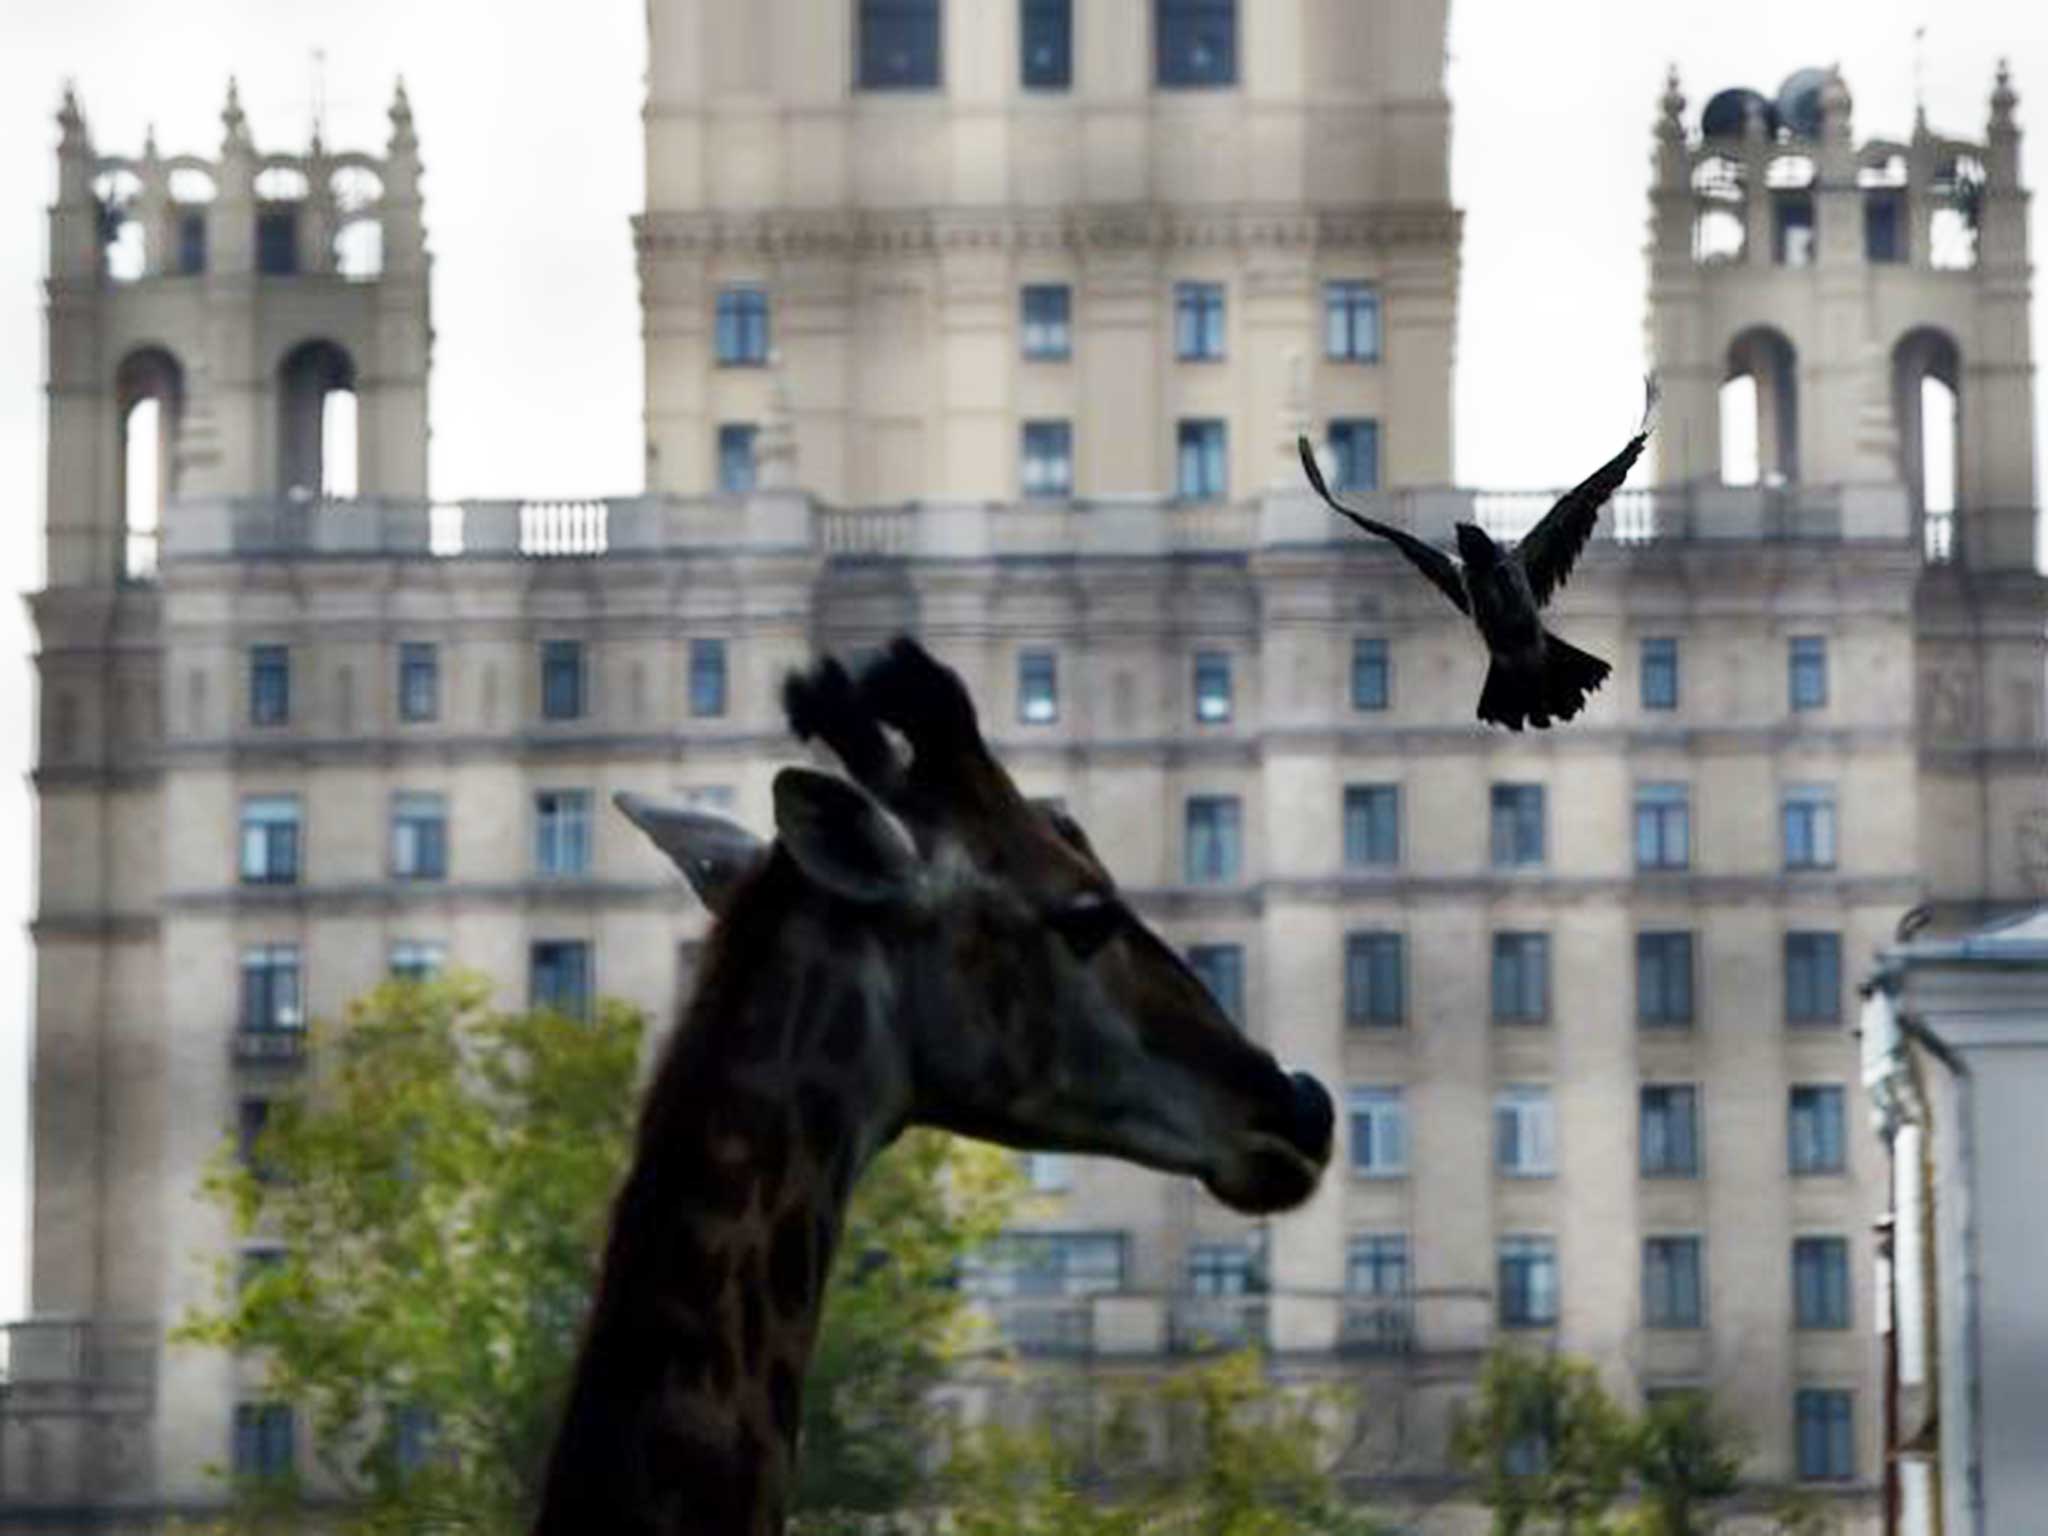 Giraffes will have to vary their diet as import bans bite in Russia